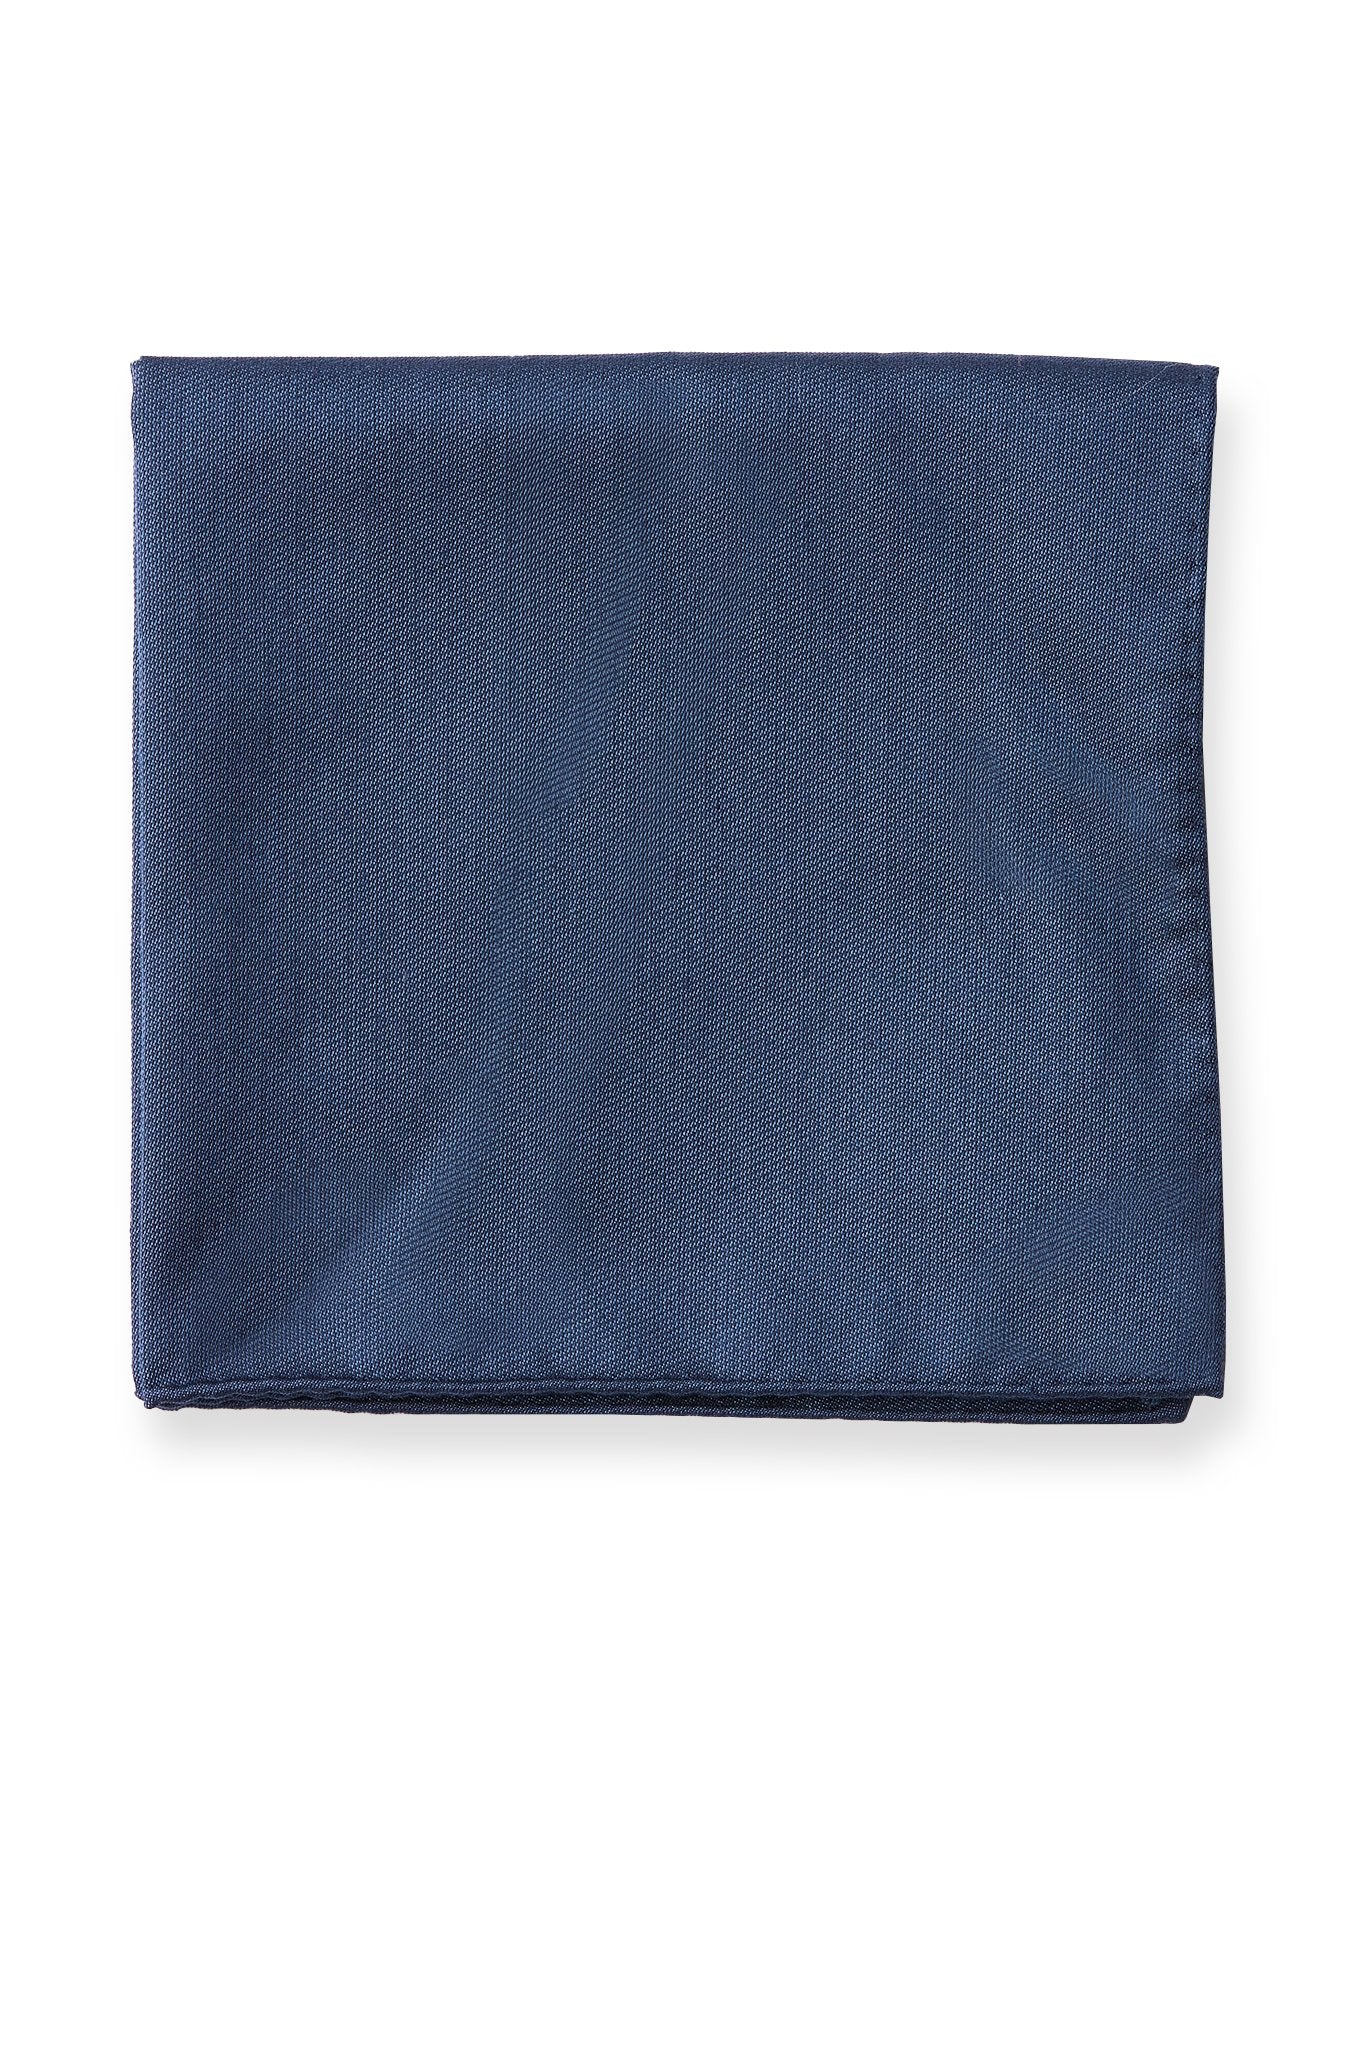 Didi Pocket Square in slate blue by Birdy Grey, front view